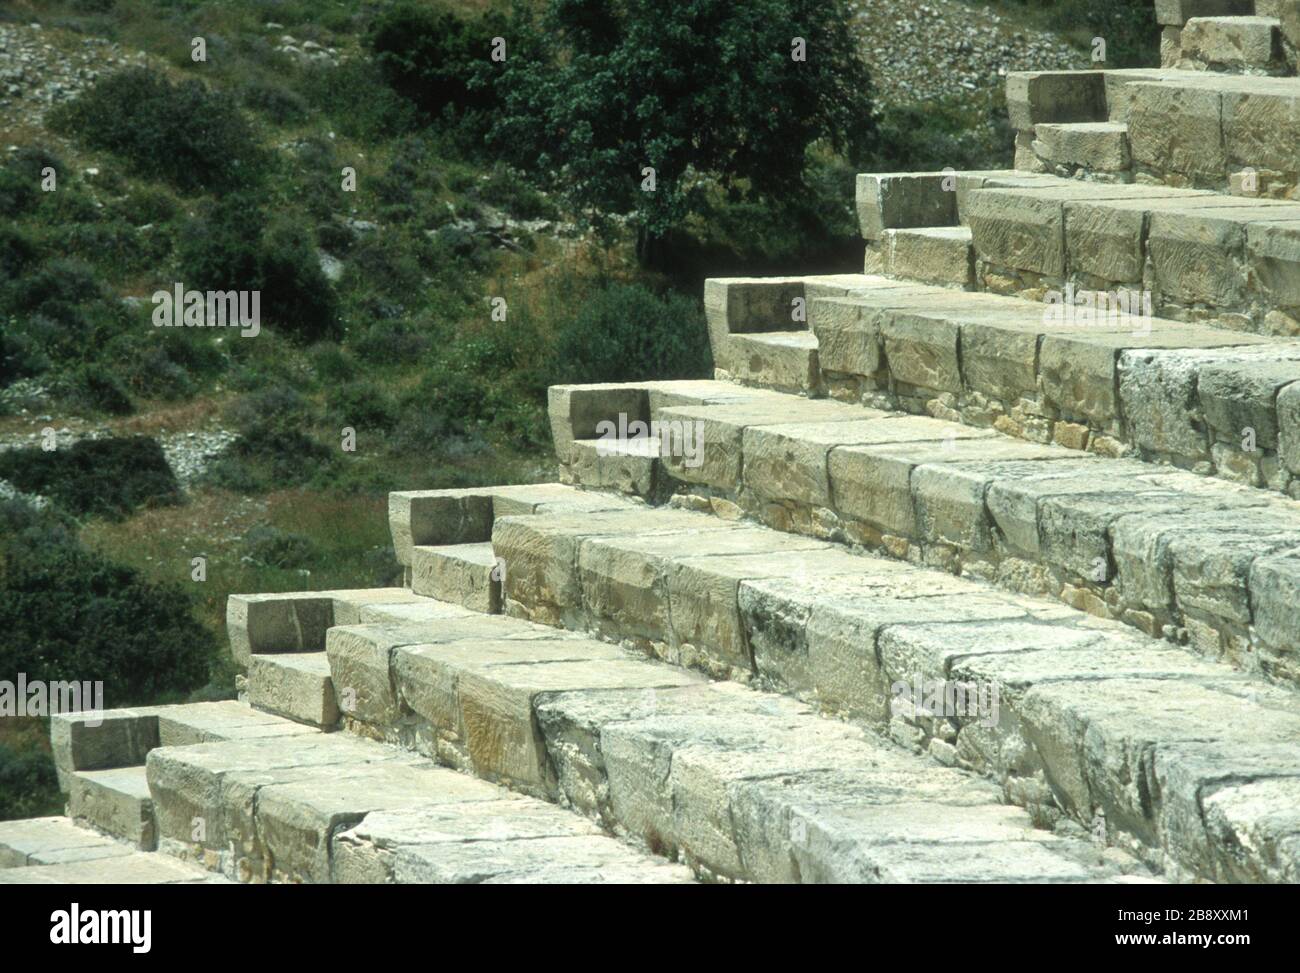 Remains of the spectacular, cliff-top Greek theatre in Kourion, Episkopi, Limassol, Cyprus. Stone seating in circular rows in the auditorium and the steps used to reach each level. Stock Photo